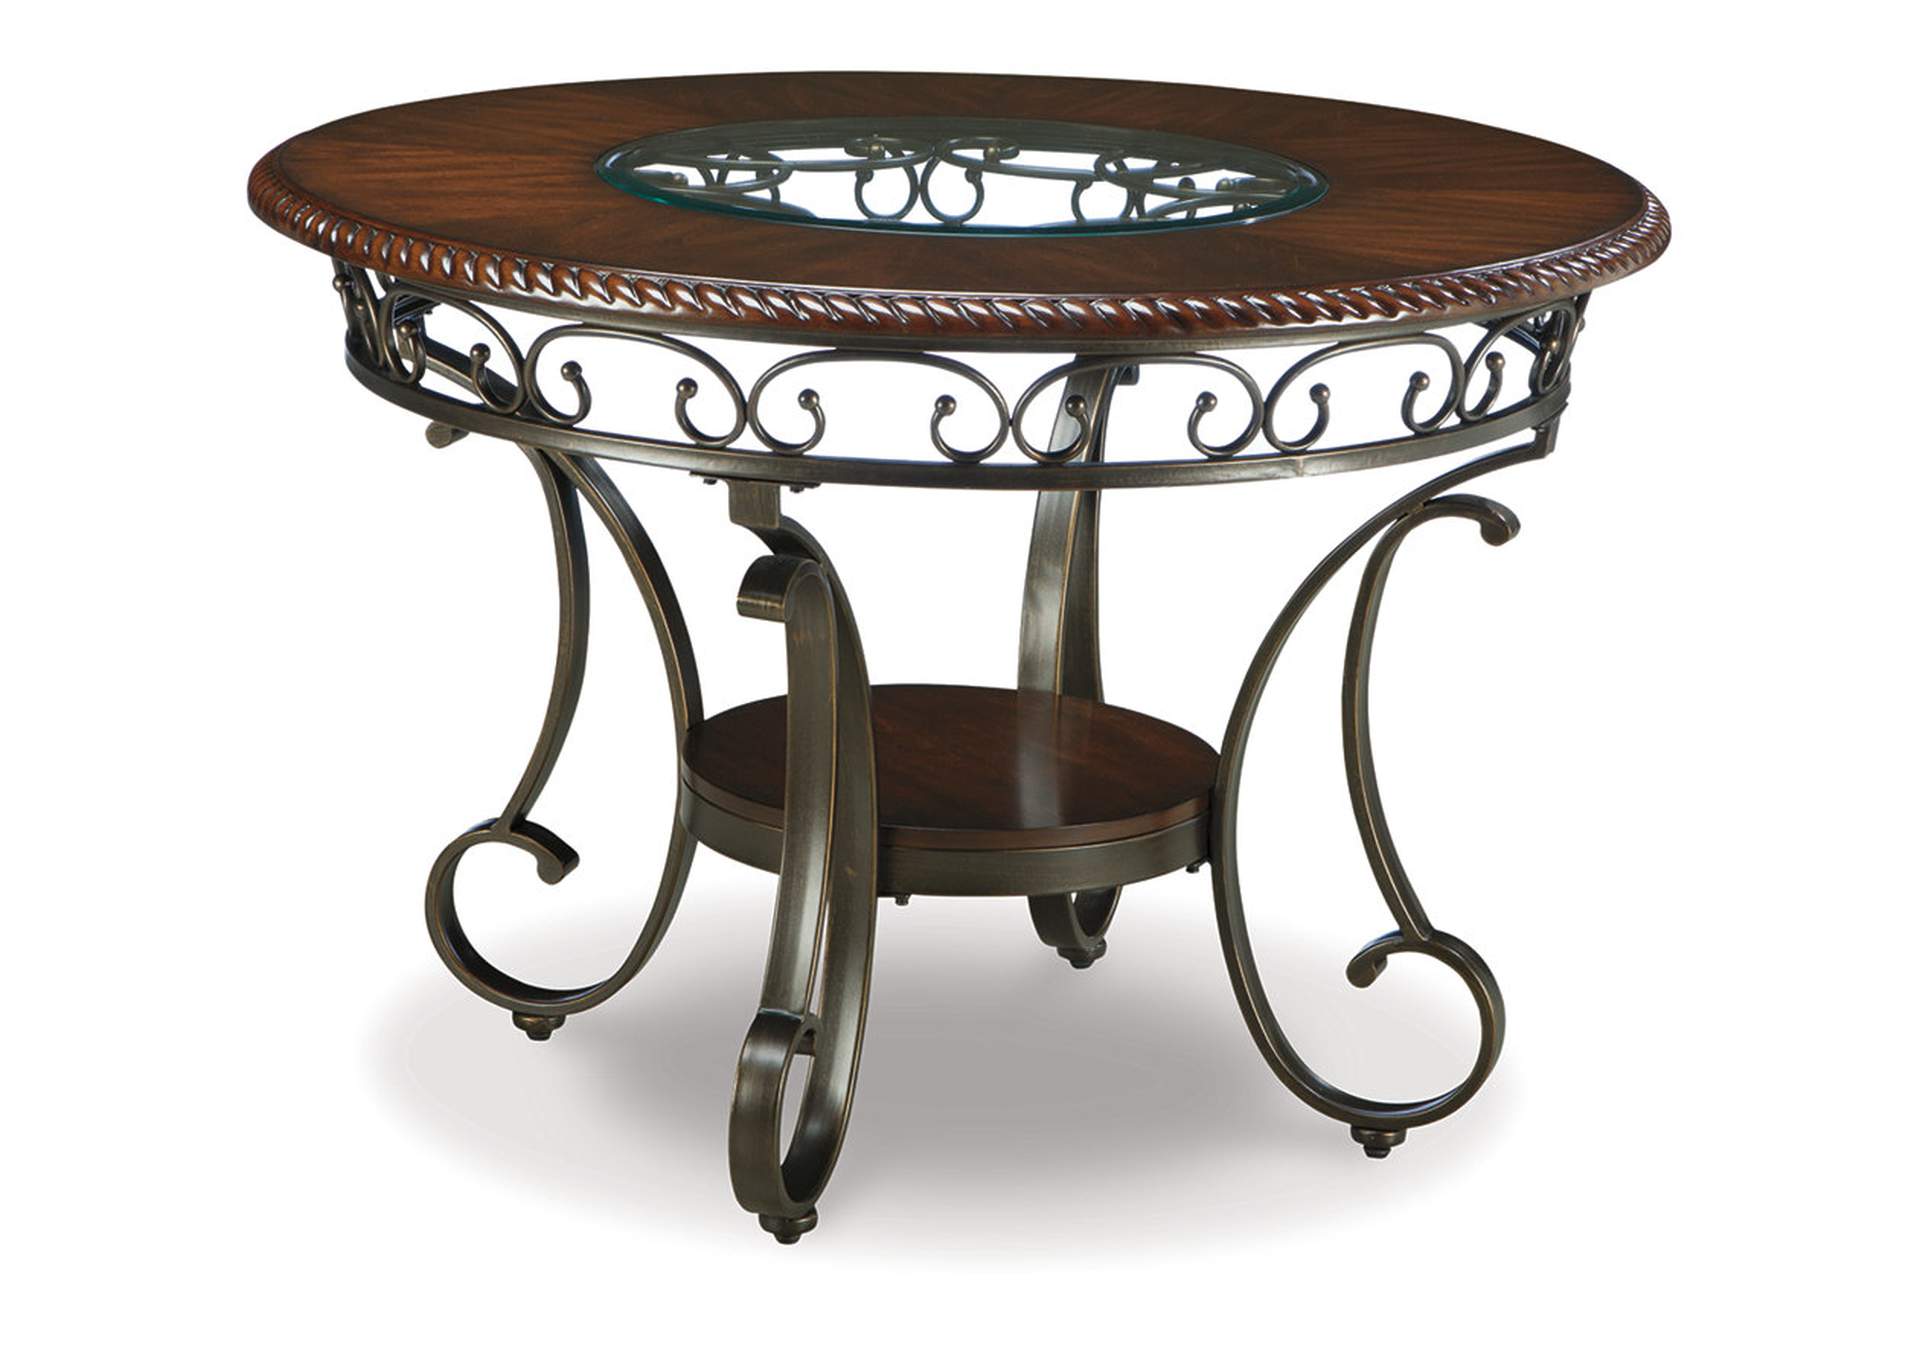 Glambrey Dining Table with 4 Chairs,Signature Design By Ashley